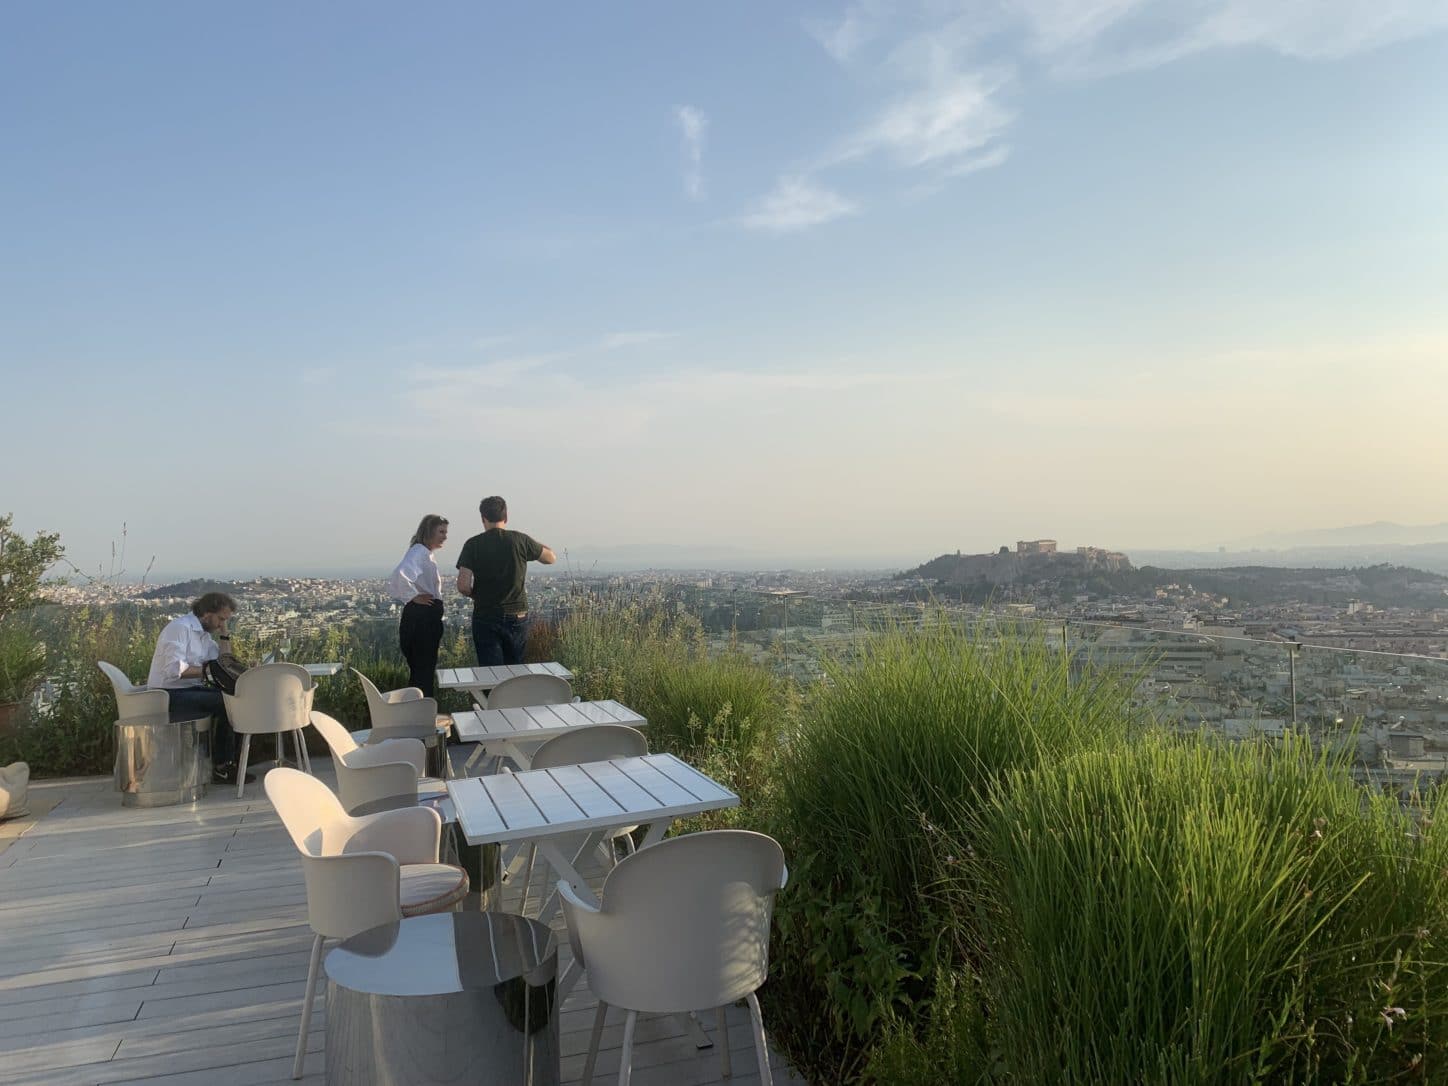 Terrace Bar at the St. George Lycabettus Hotel, Athens, Greece, Photo by ConsumerMojo.com